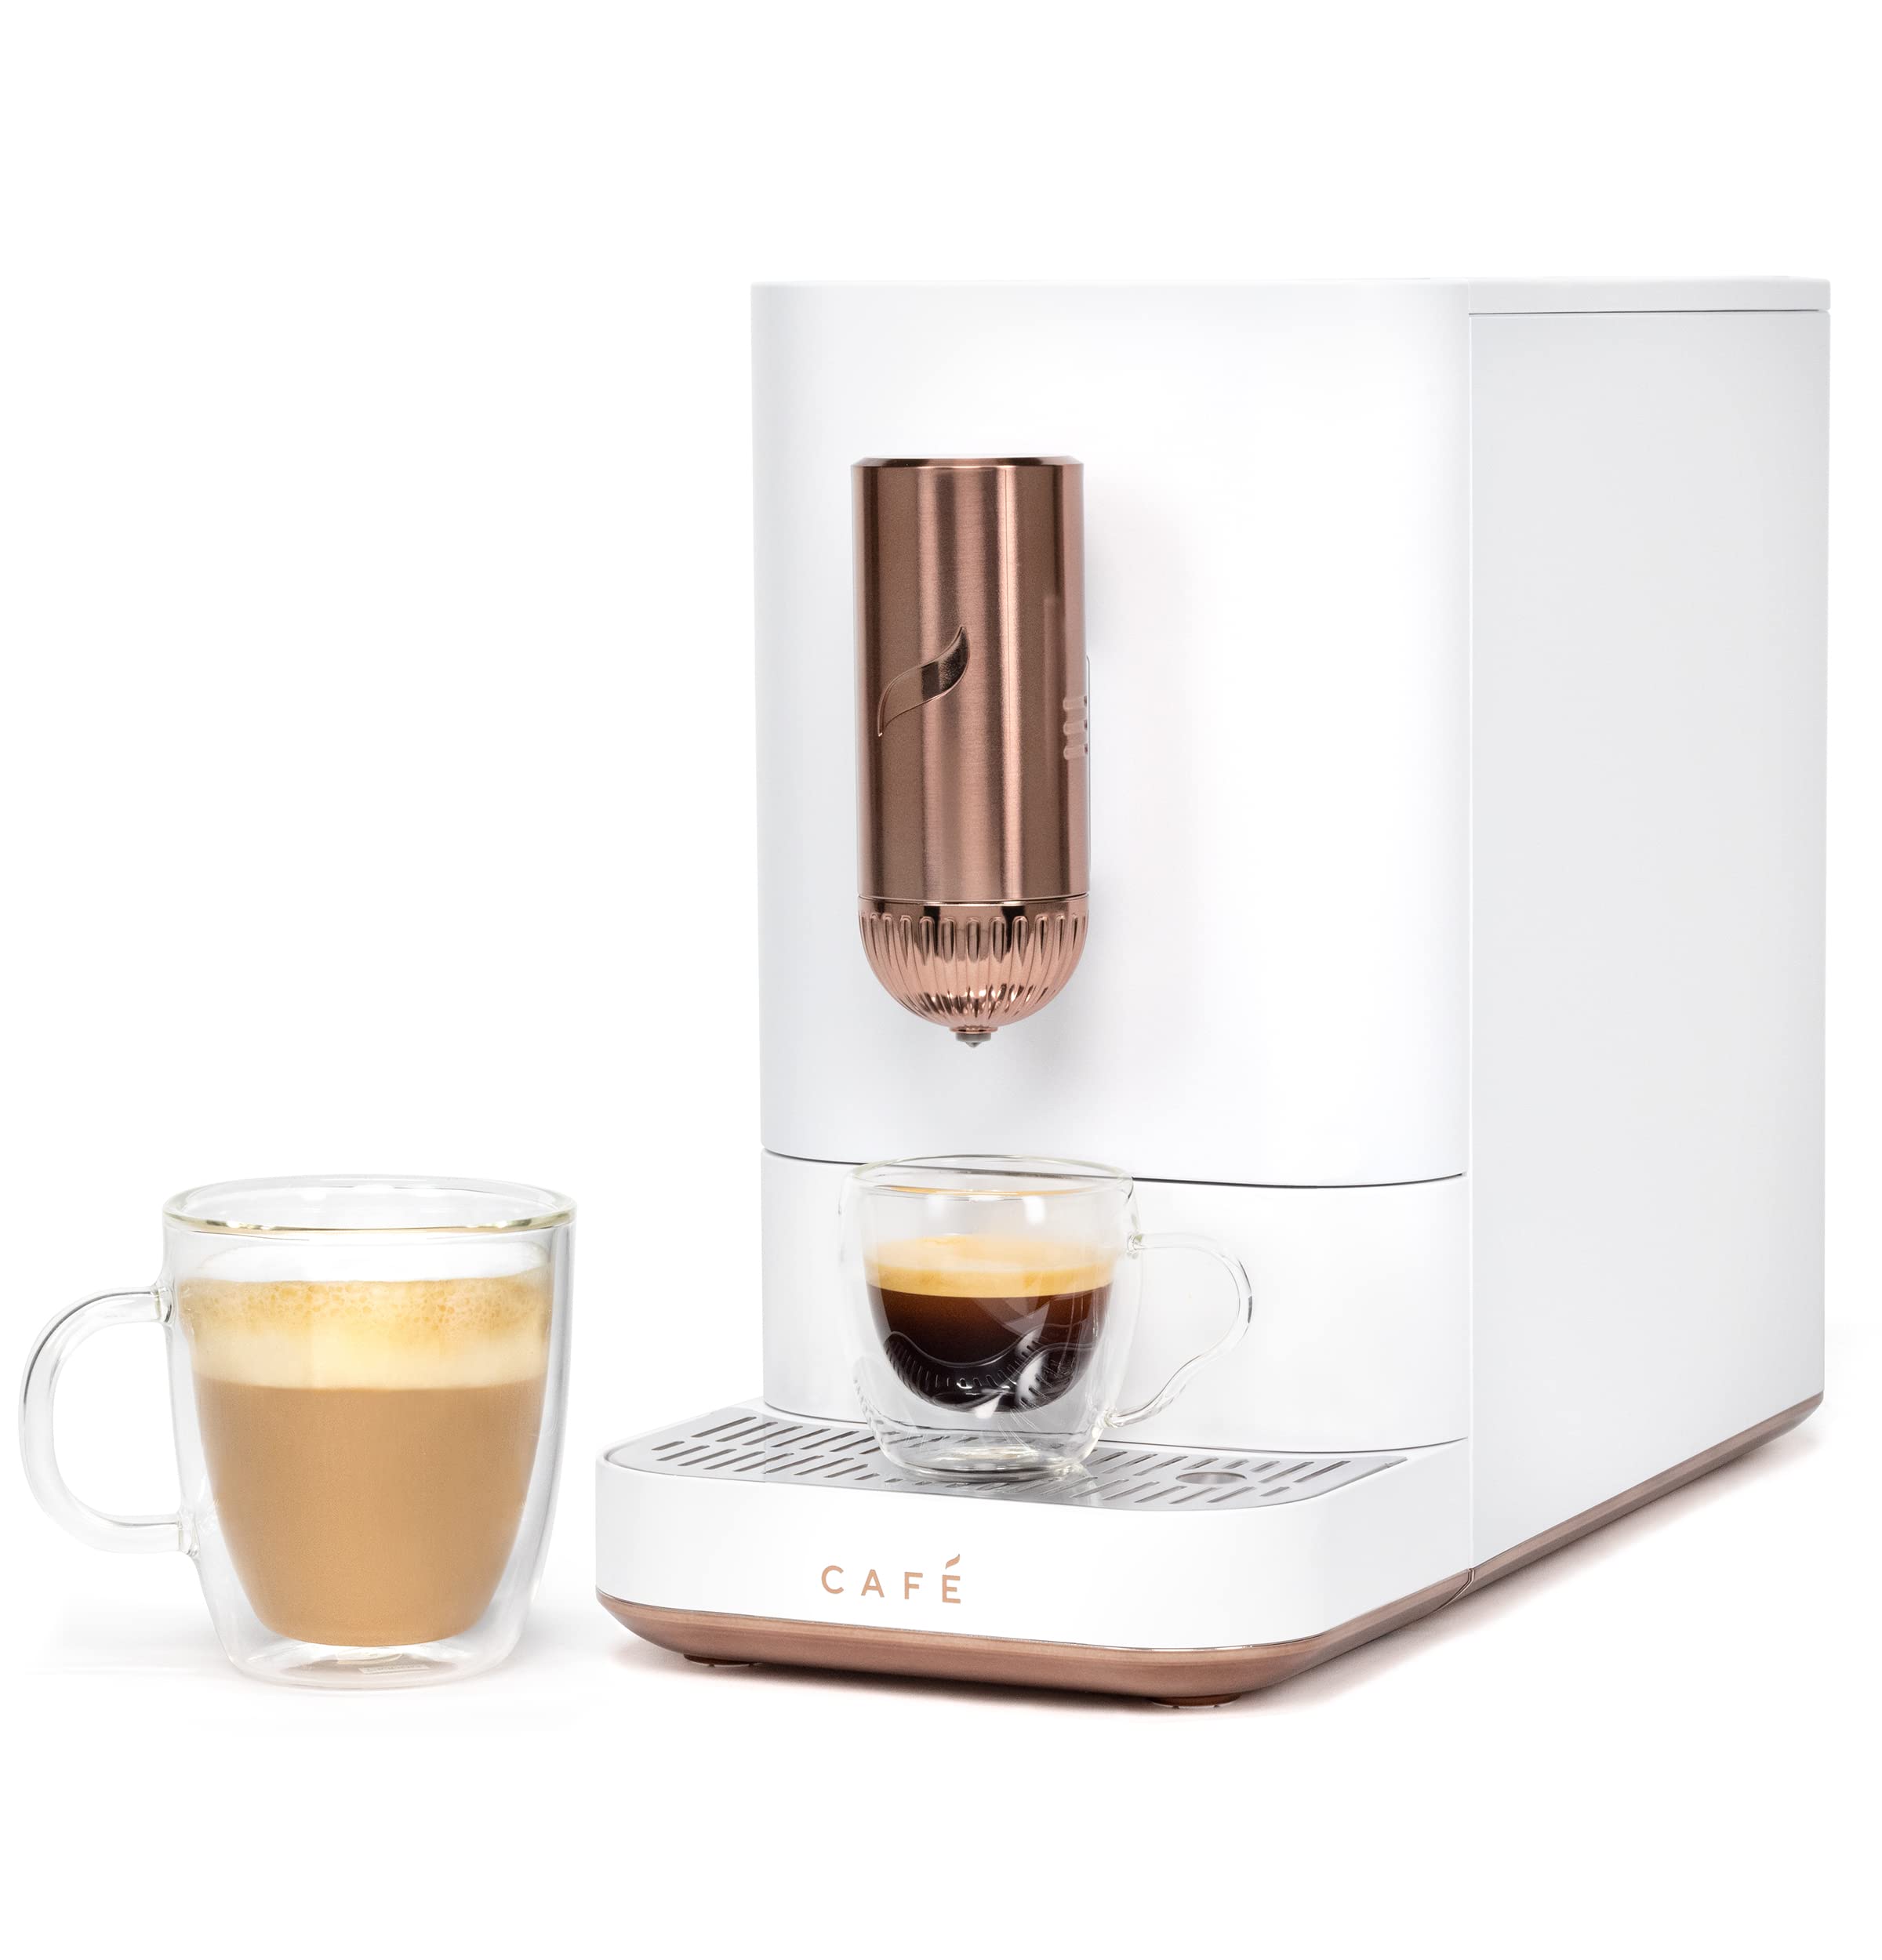 Café Affetto Automatic Espresso Machine | 20 Bar Pump Pressure for Balanced Extraction | Five Adjustable Grind Size Levels | WiFi Connected for Drink Customization White $299